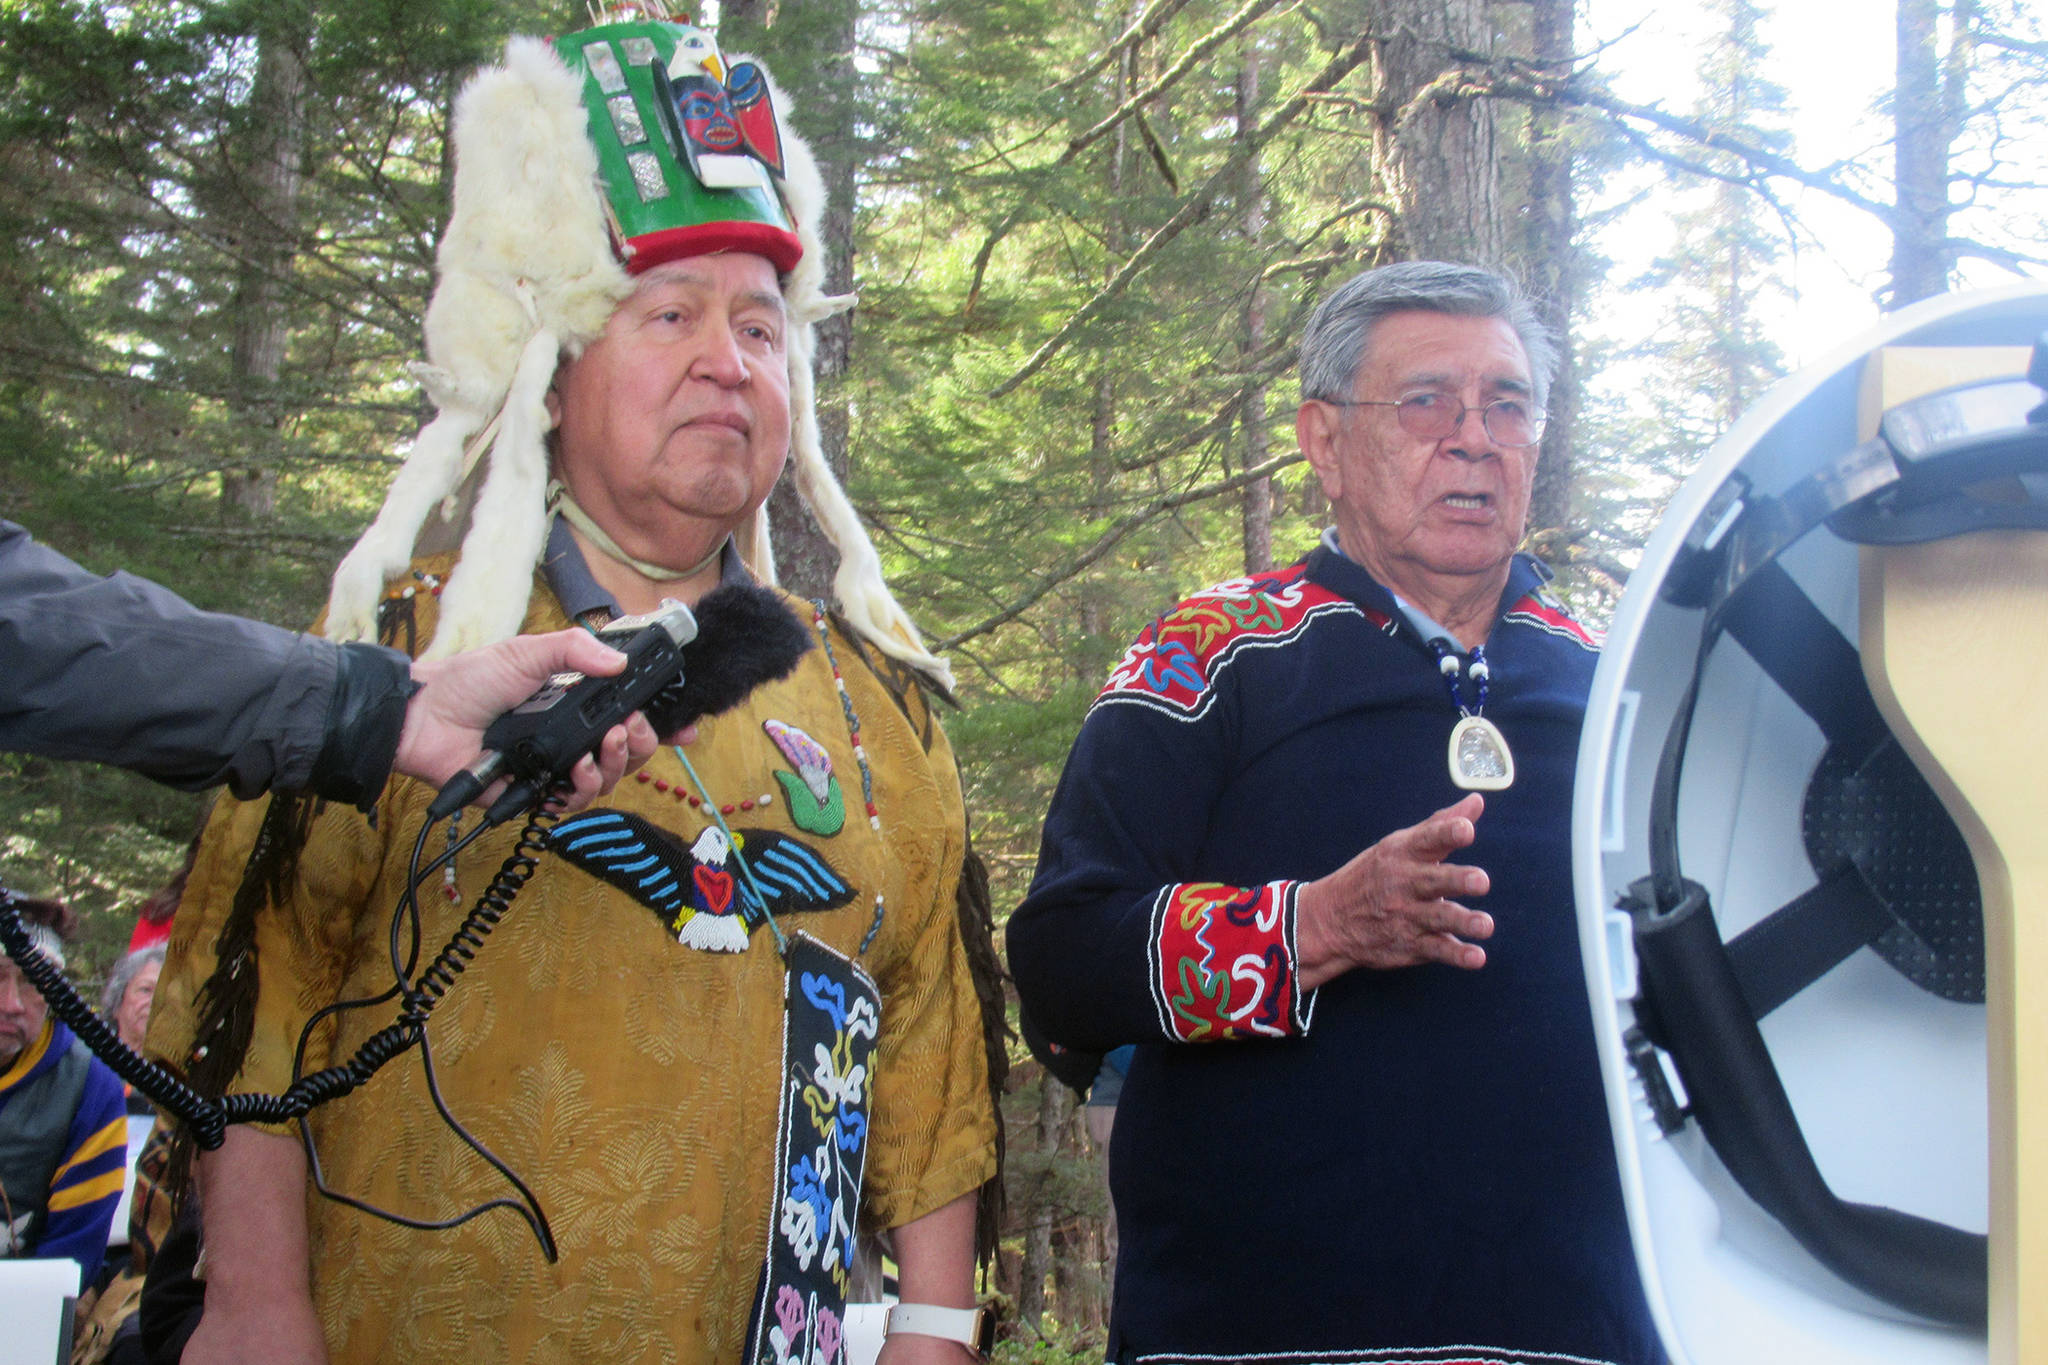 Ozzie Sheakley and Ernest Jack speak during a ground breaking and ground blessing ceremony for at the site of a new dock being built at Icy Strait Point near Hoonah, May 1, 2019. (Ben Hohenstatt | Juneau Empire)